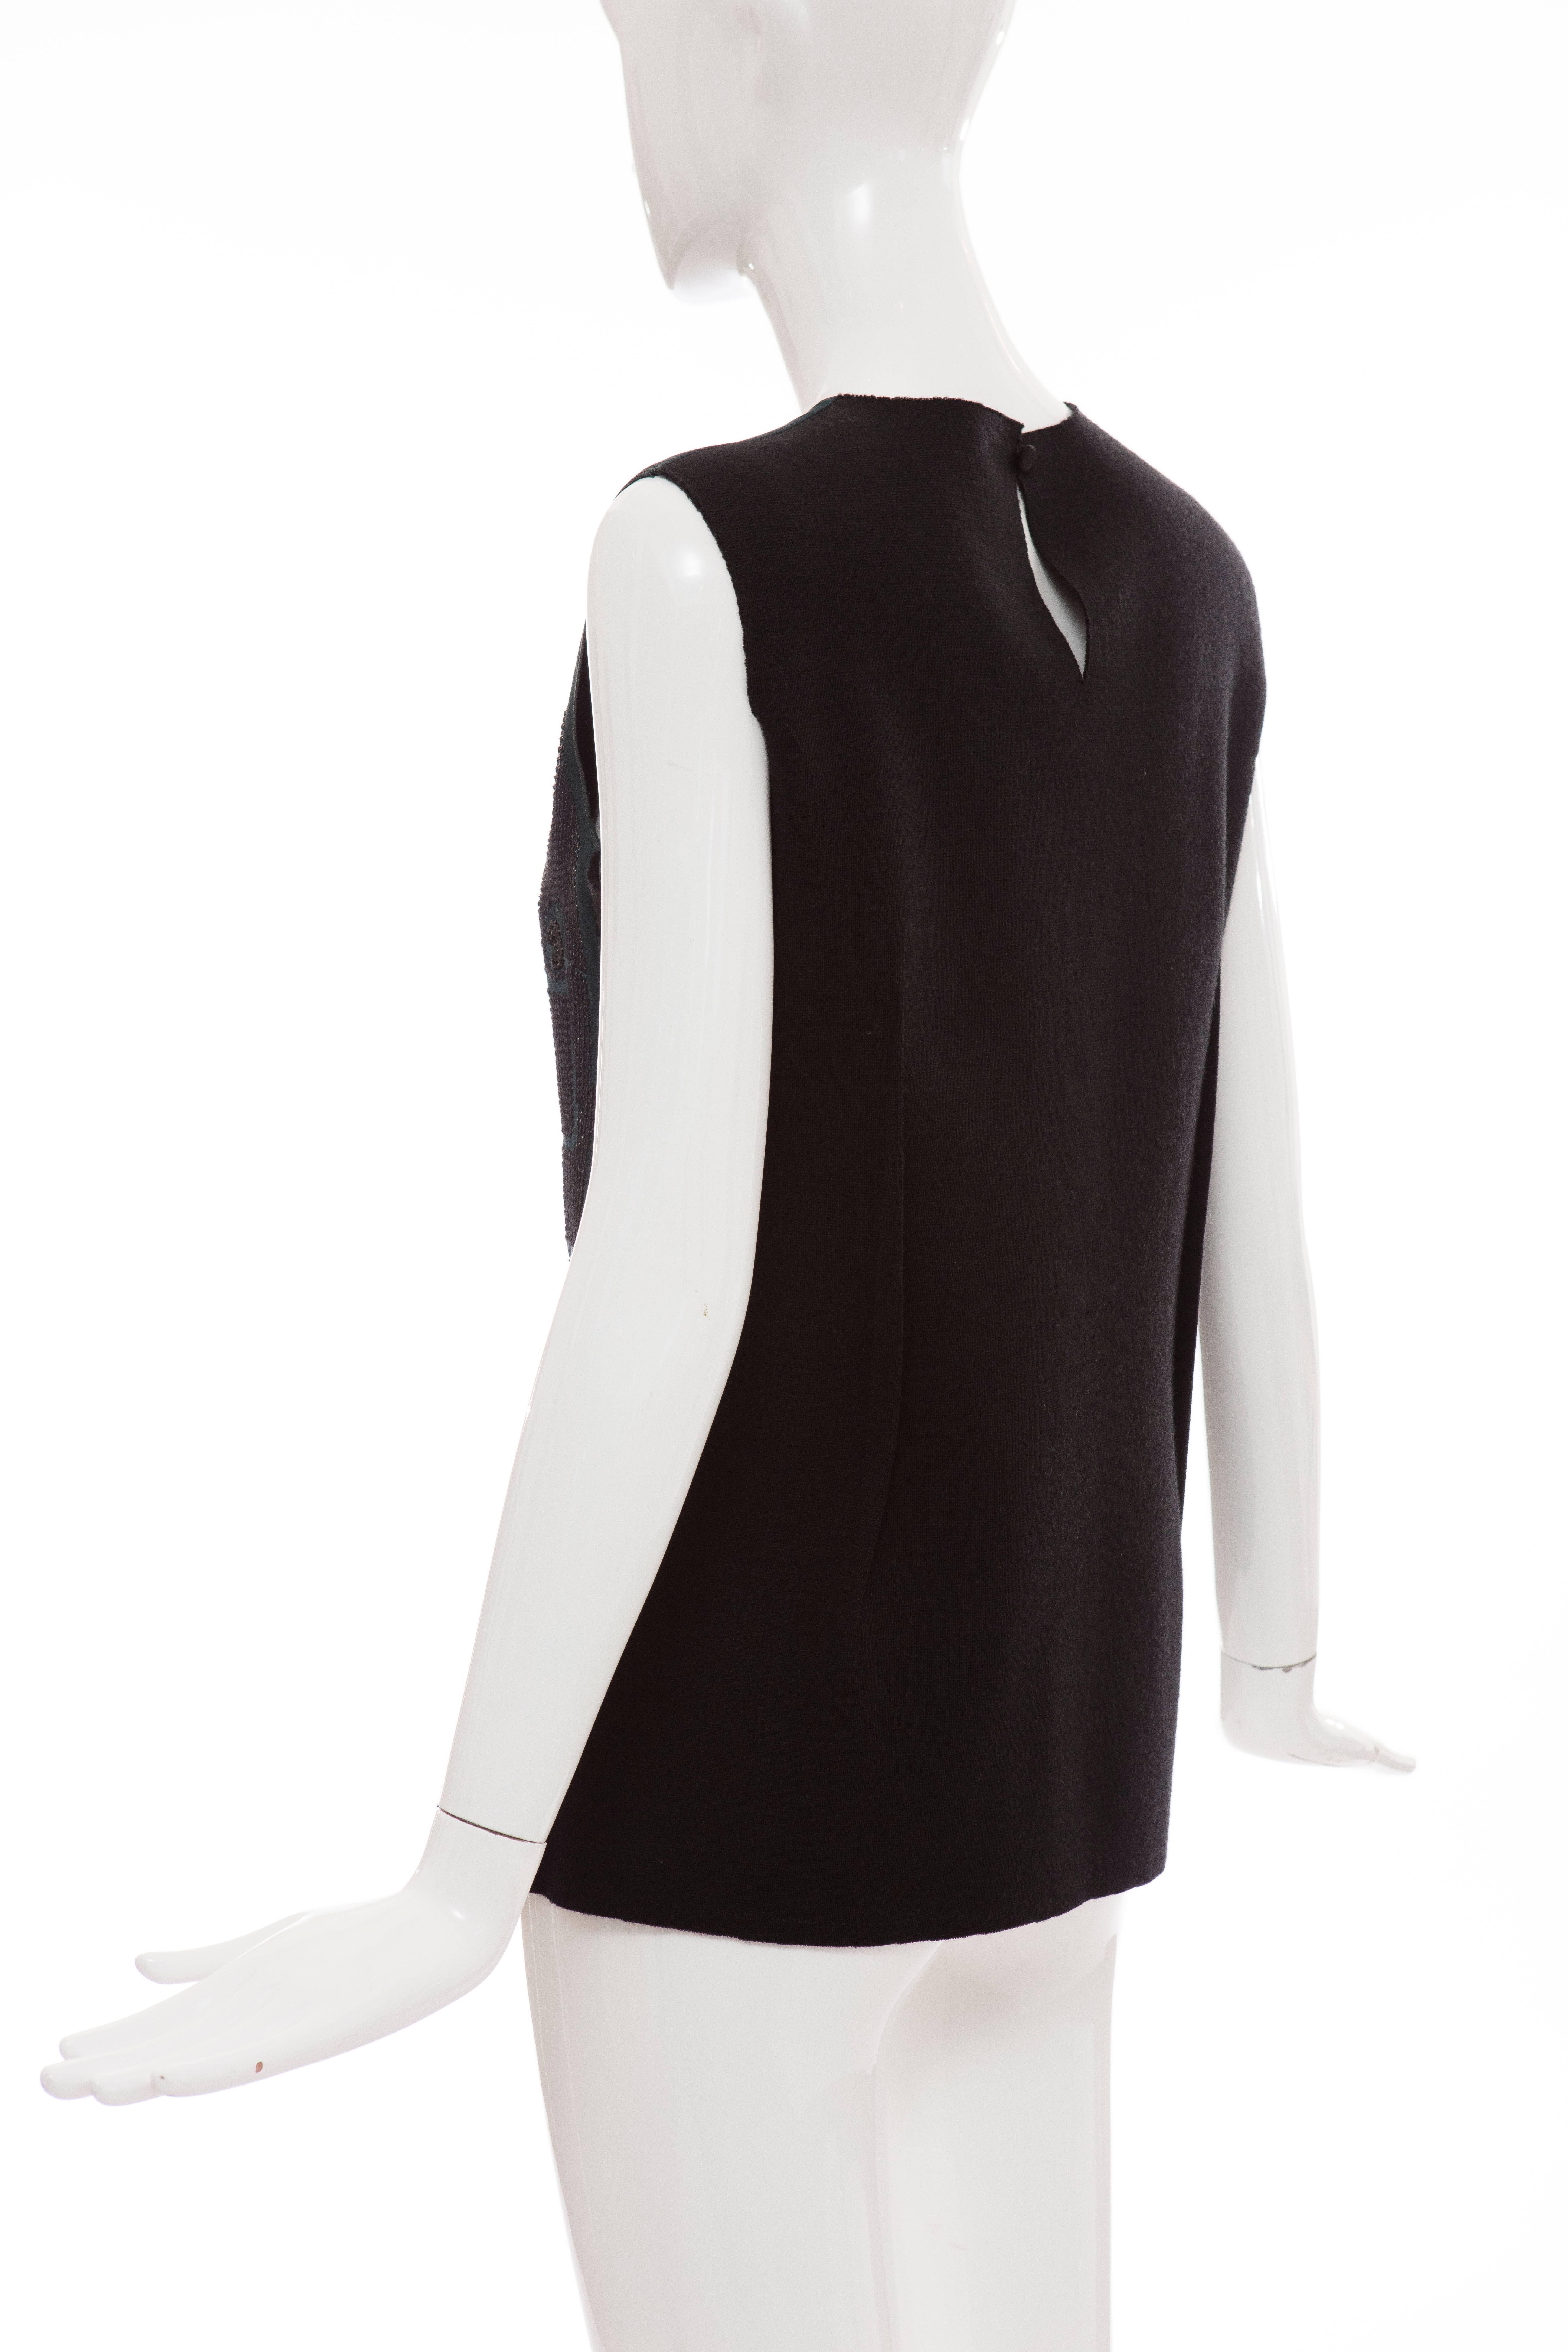 Lanvin By Alber Elbaz Sleeveless Trompe l'oeil  Silk Embellished Top Circa 2006 For Sale 2